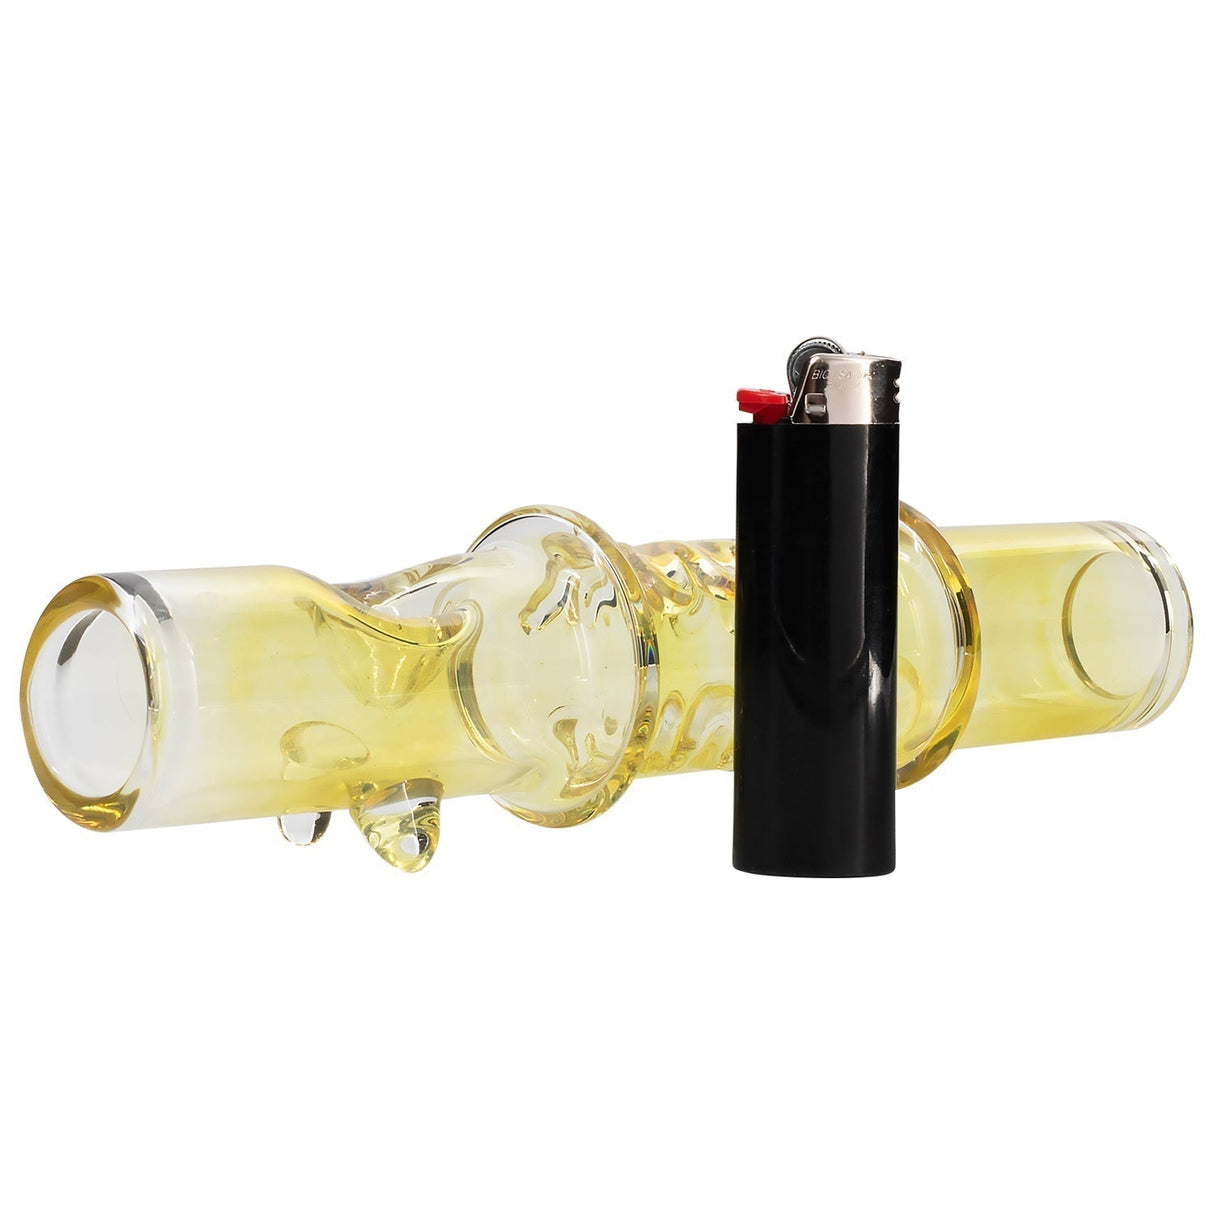 LA Pipes Silver Fumed Steamroller - Compact 5" Hand Pipe with Color Changing Glass